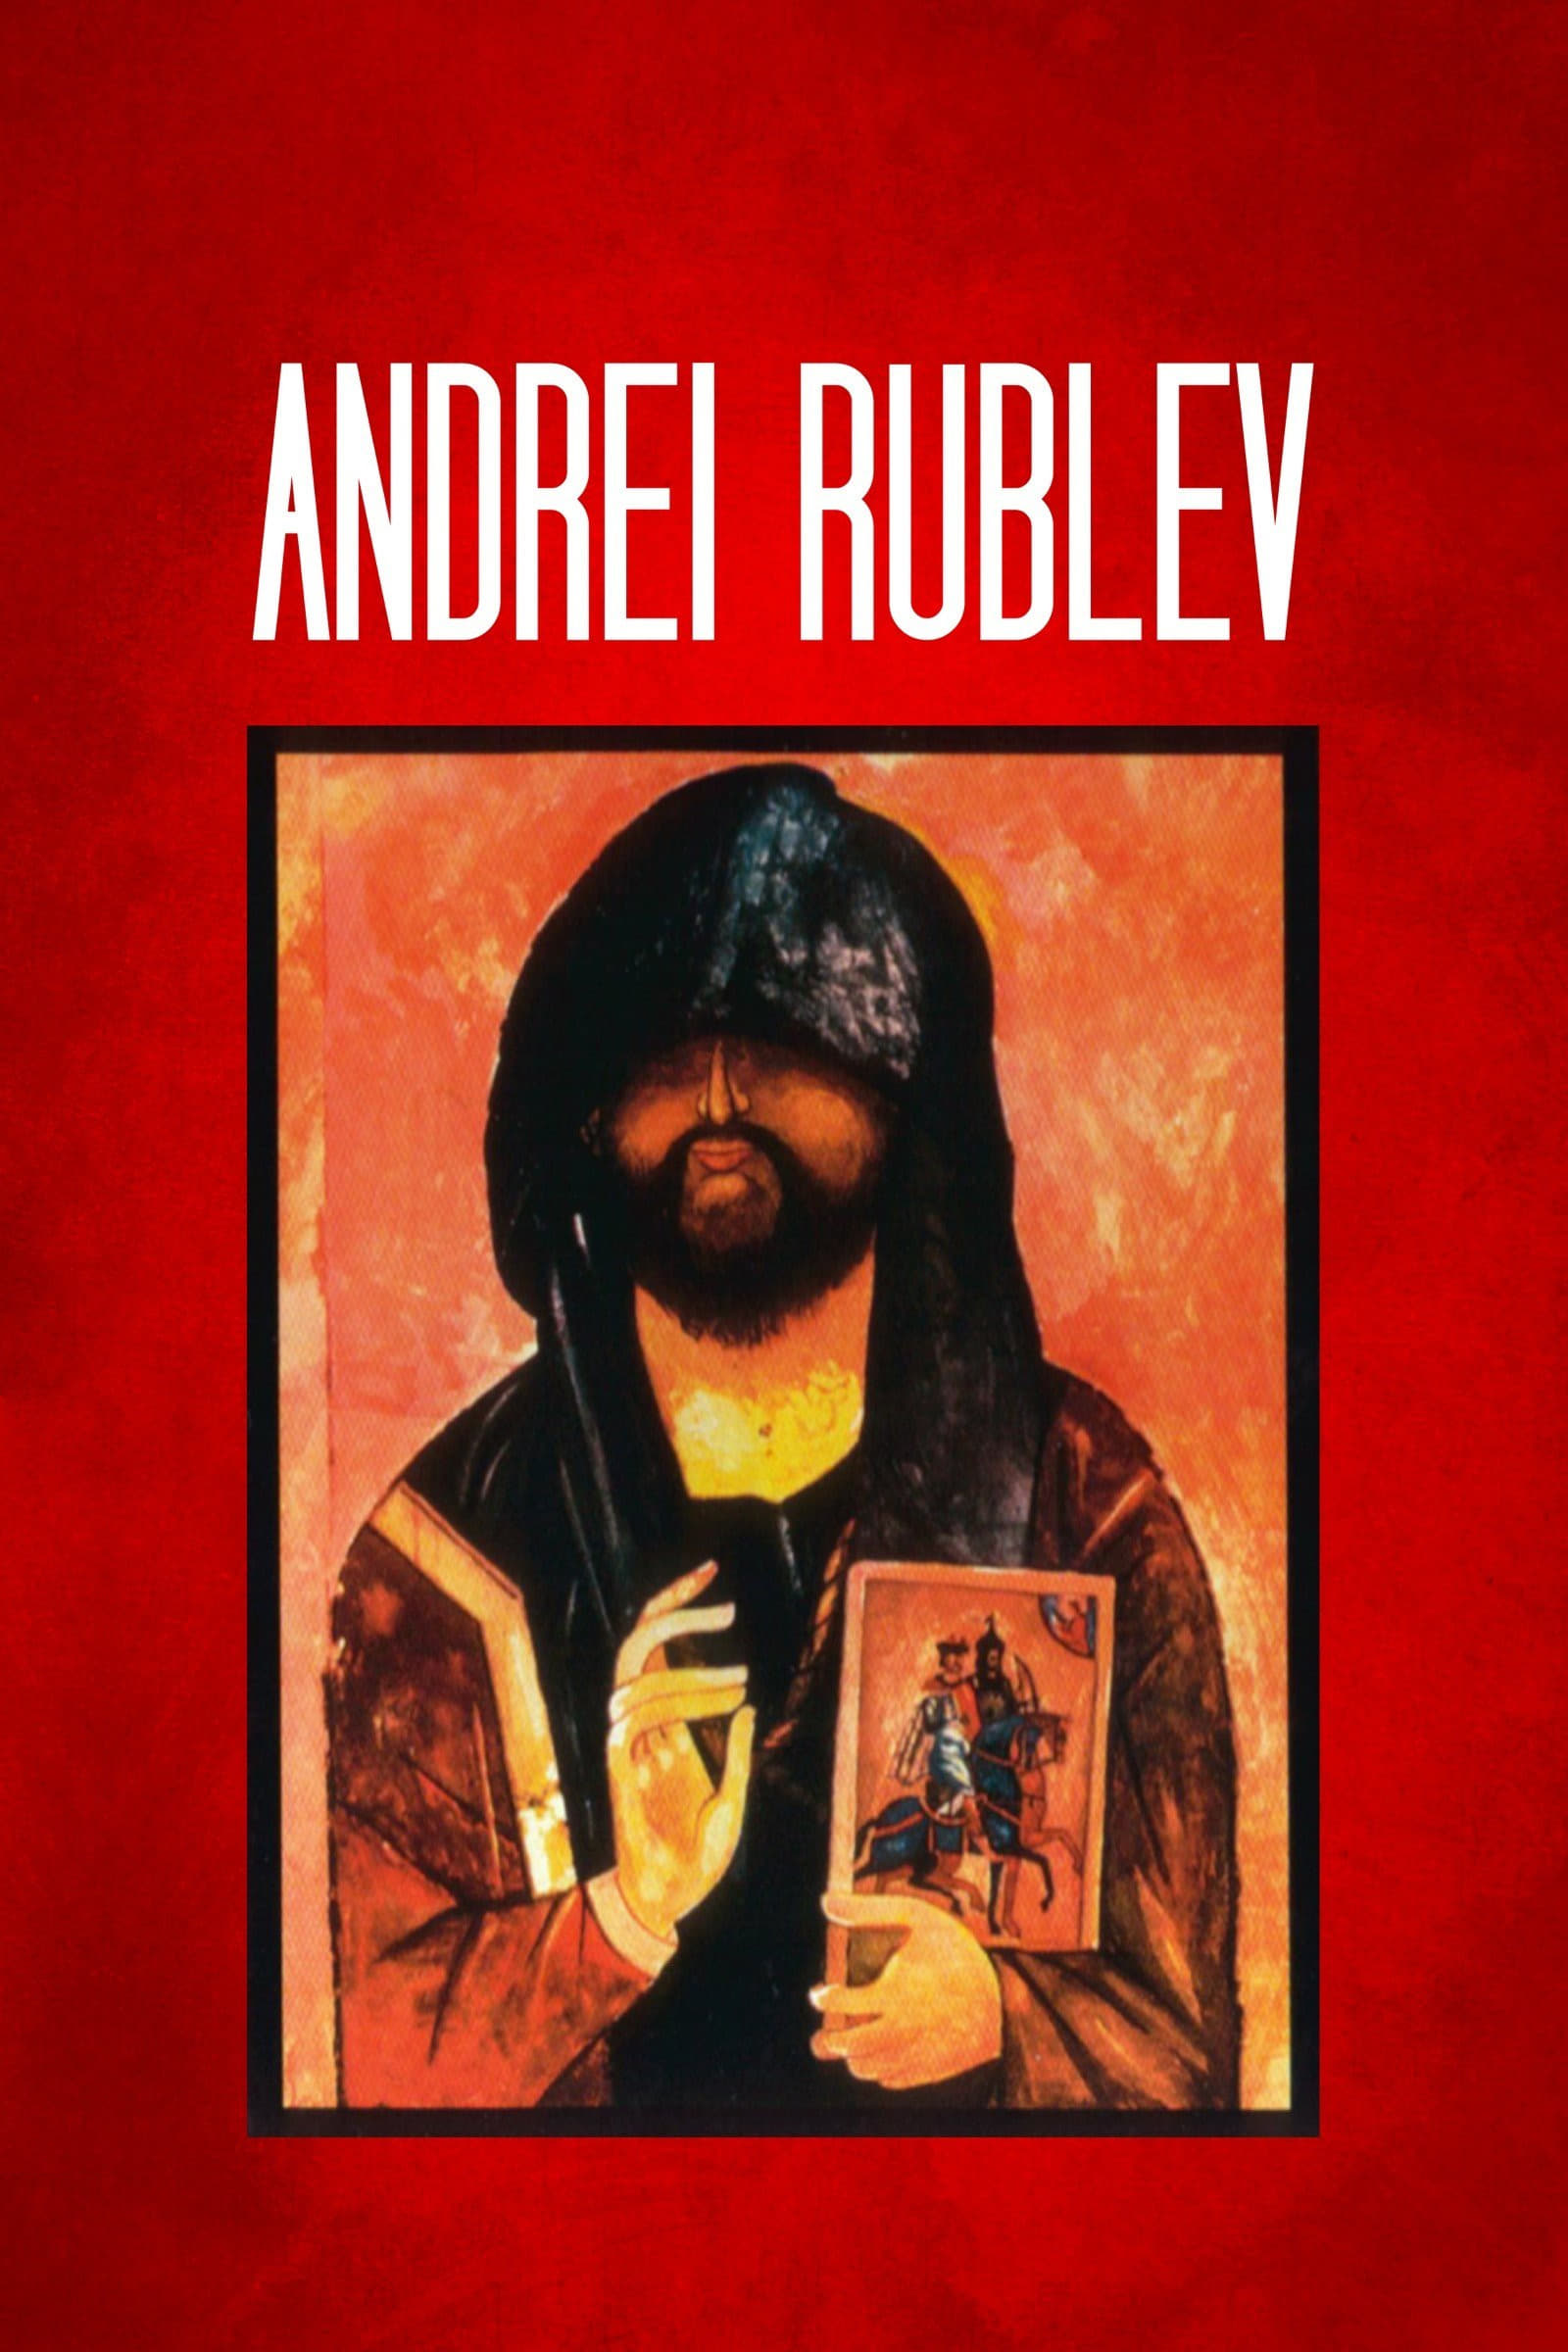 1966 Andrei Rublev